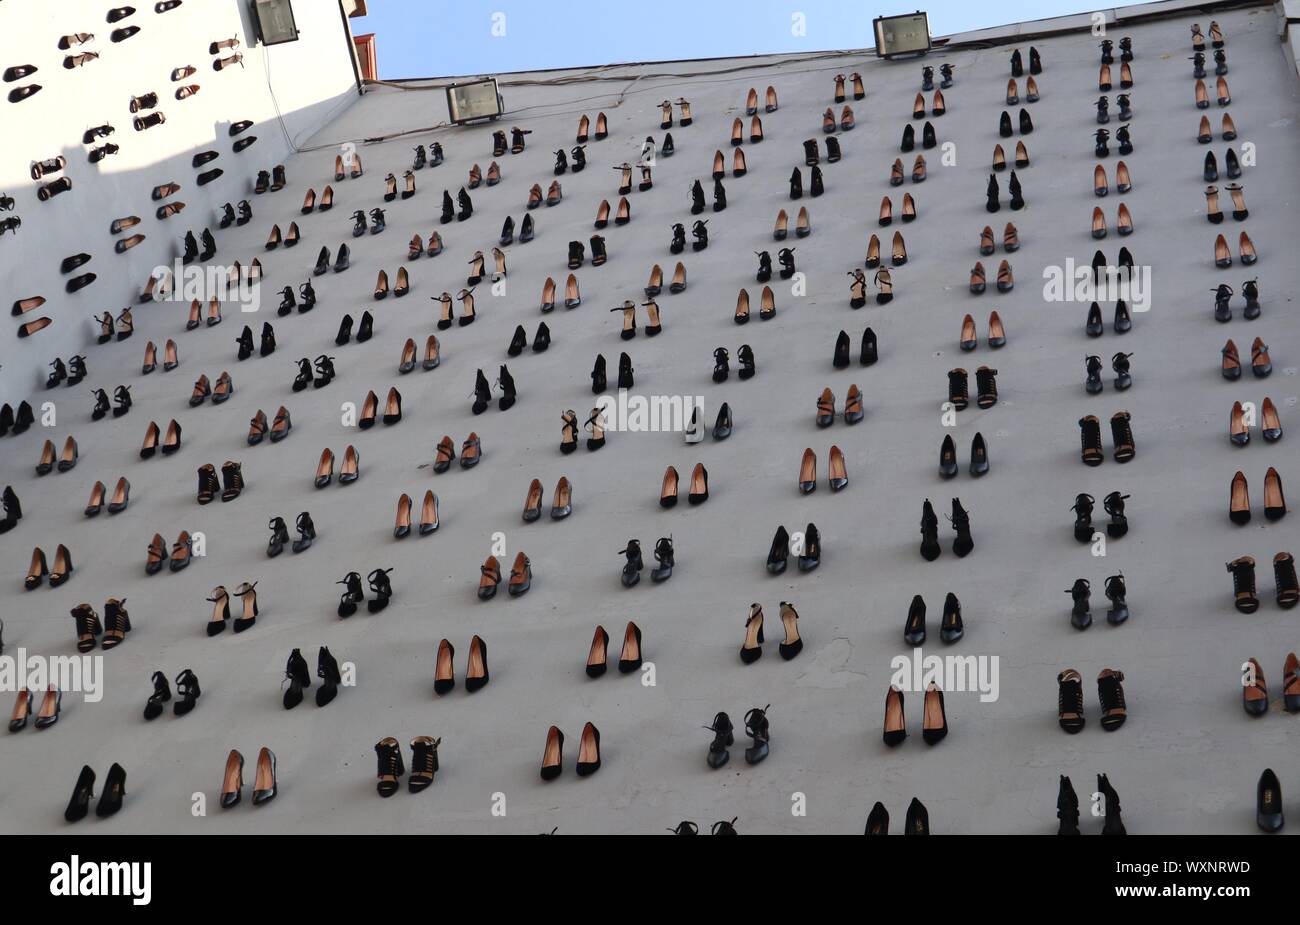 Istanbul, Turkey. 17th Sep, 2019. High heels are installed on a facade of a building in downtown Istanbul, Turkey, Sept. 17, 2019. A total of 440 pairs of high-heel black shoes were installed recently on a facade of a building in downtown Istanbul to draw attention to the equal number of women murders in Turkey last year and raise awareness against increasing male violence in the country. Credit: Xu Suhui/Xinhua/Alamy Live News Stock Photo